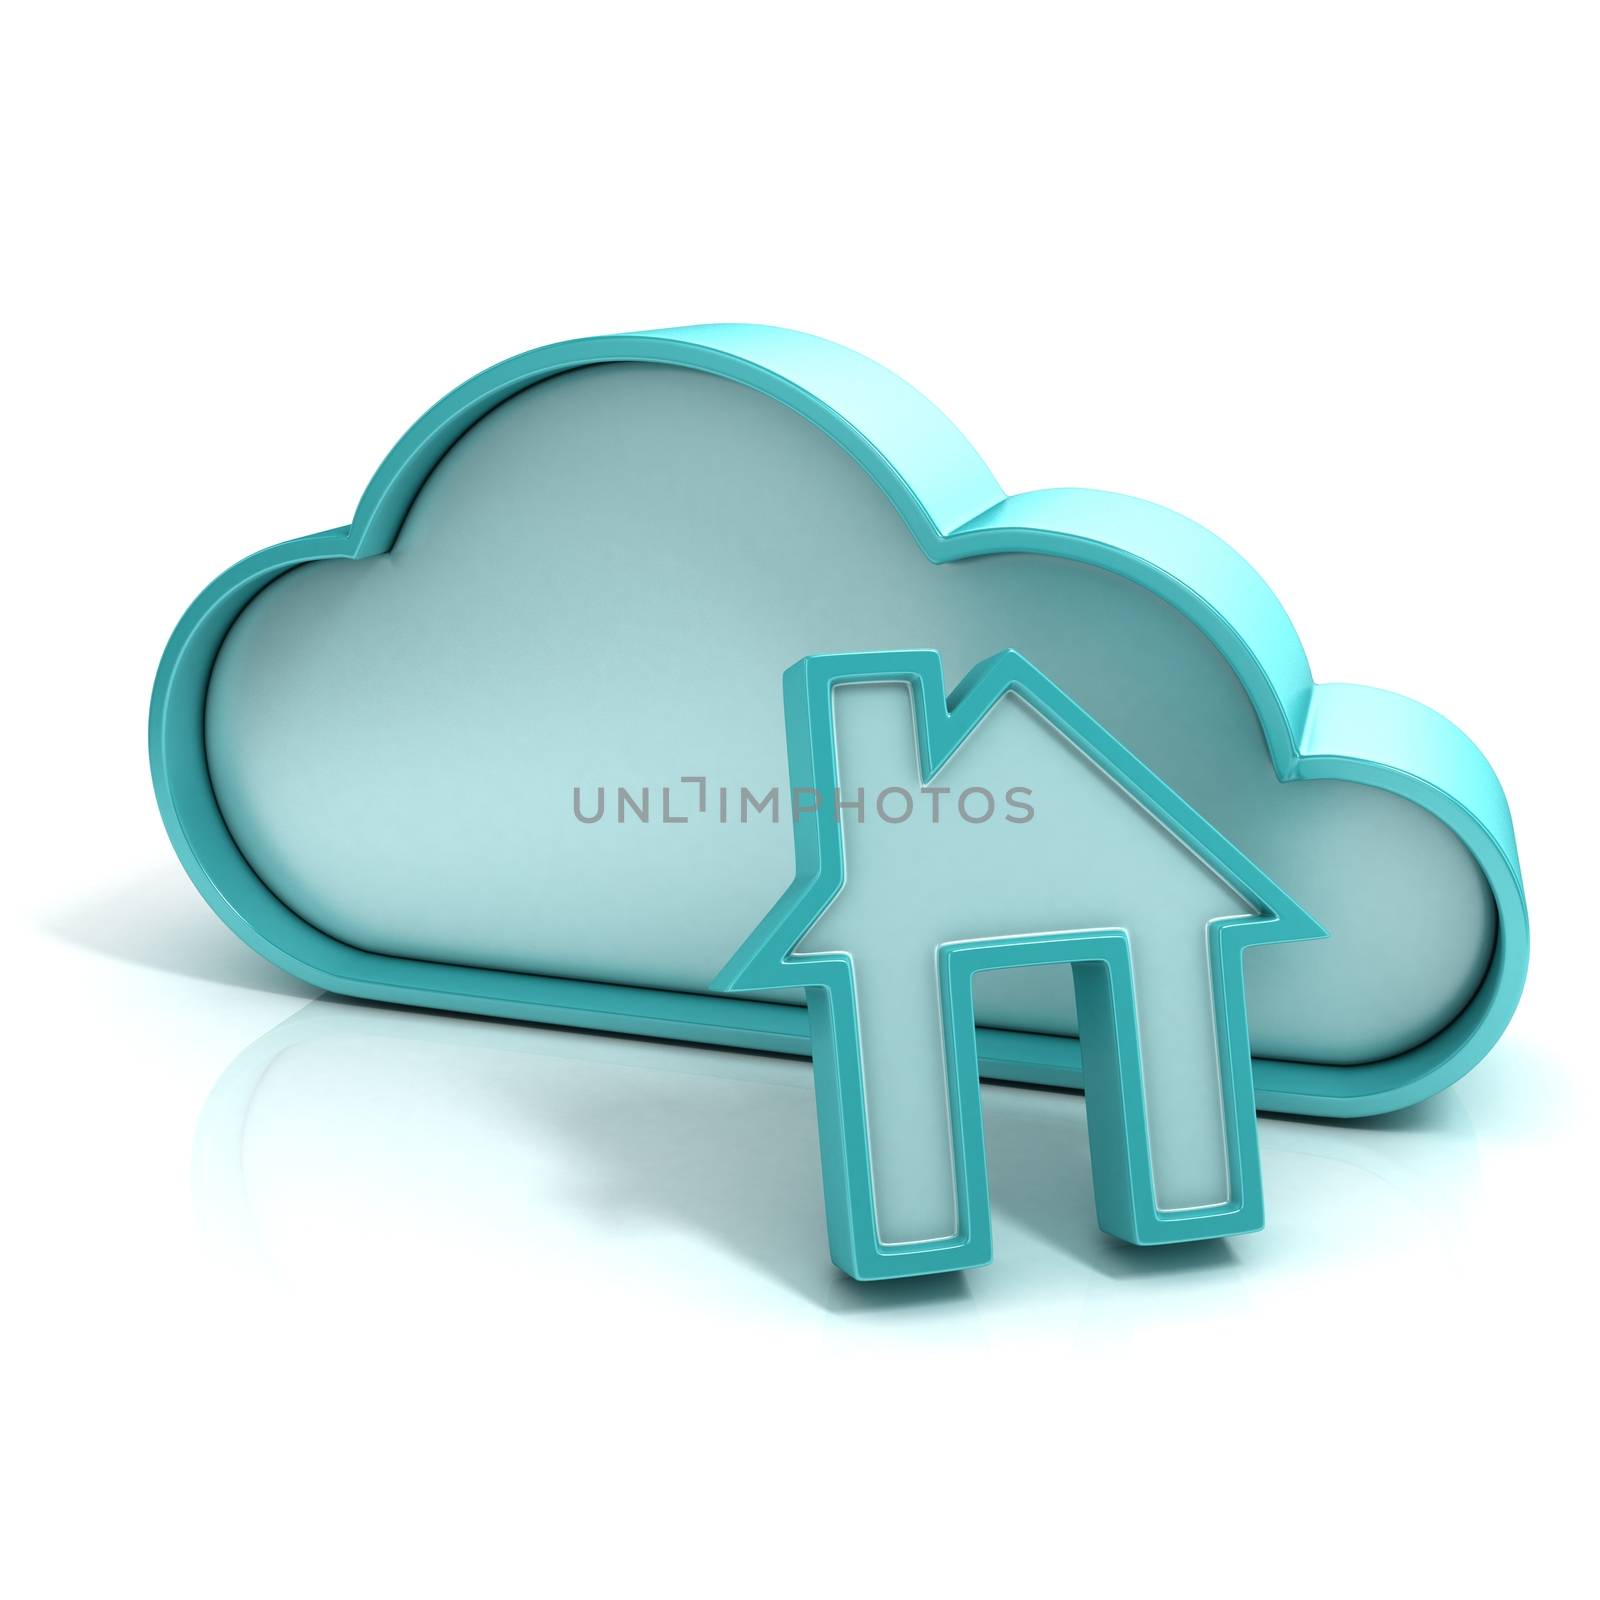 Cloud home 3D computer icon by djmilic